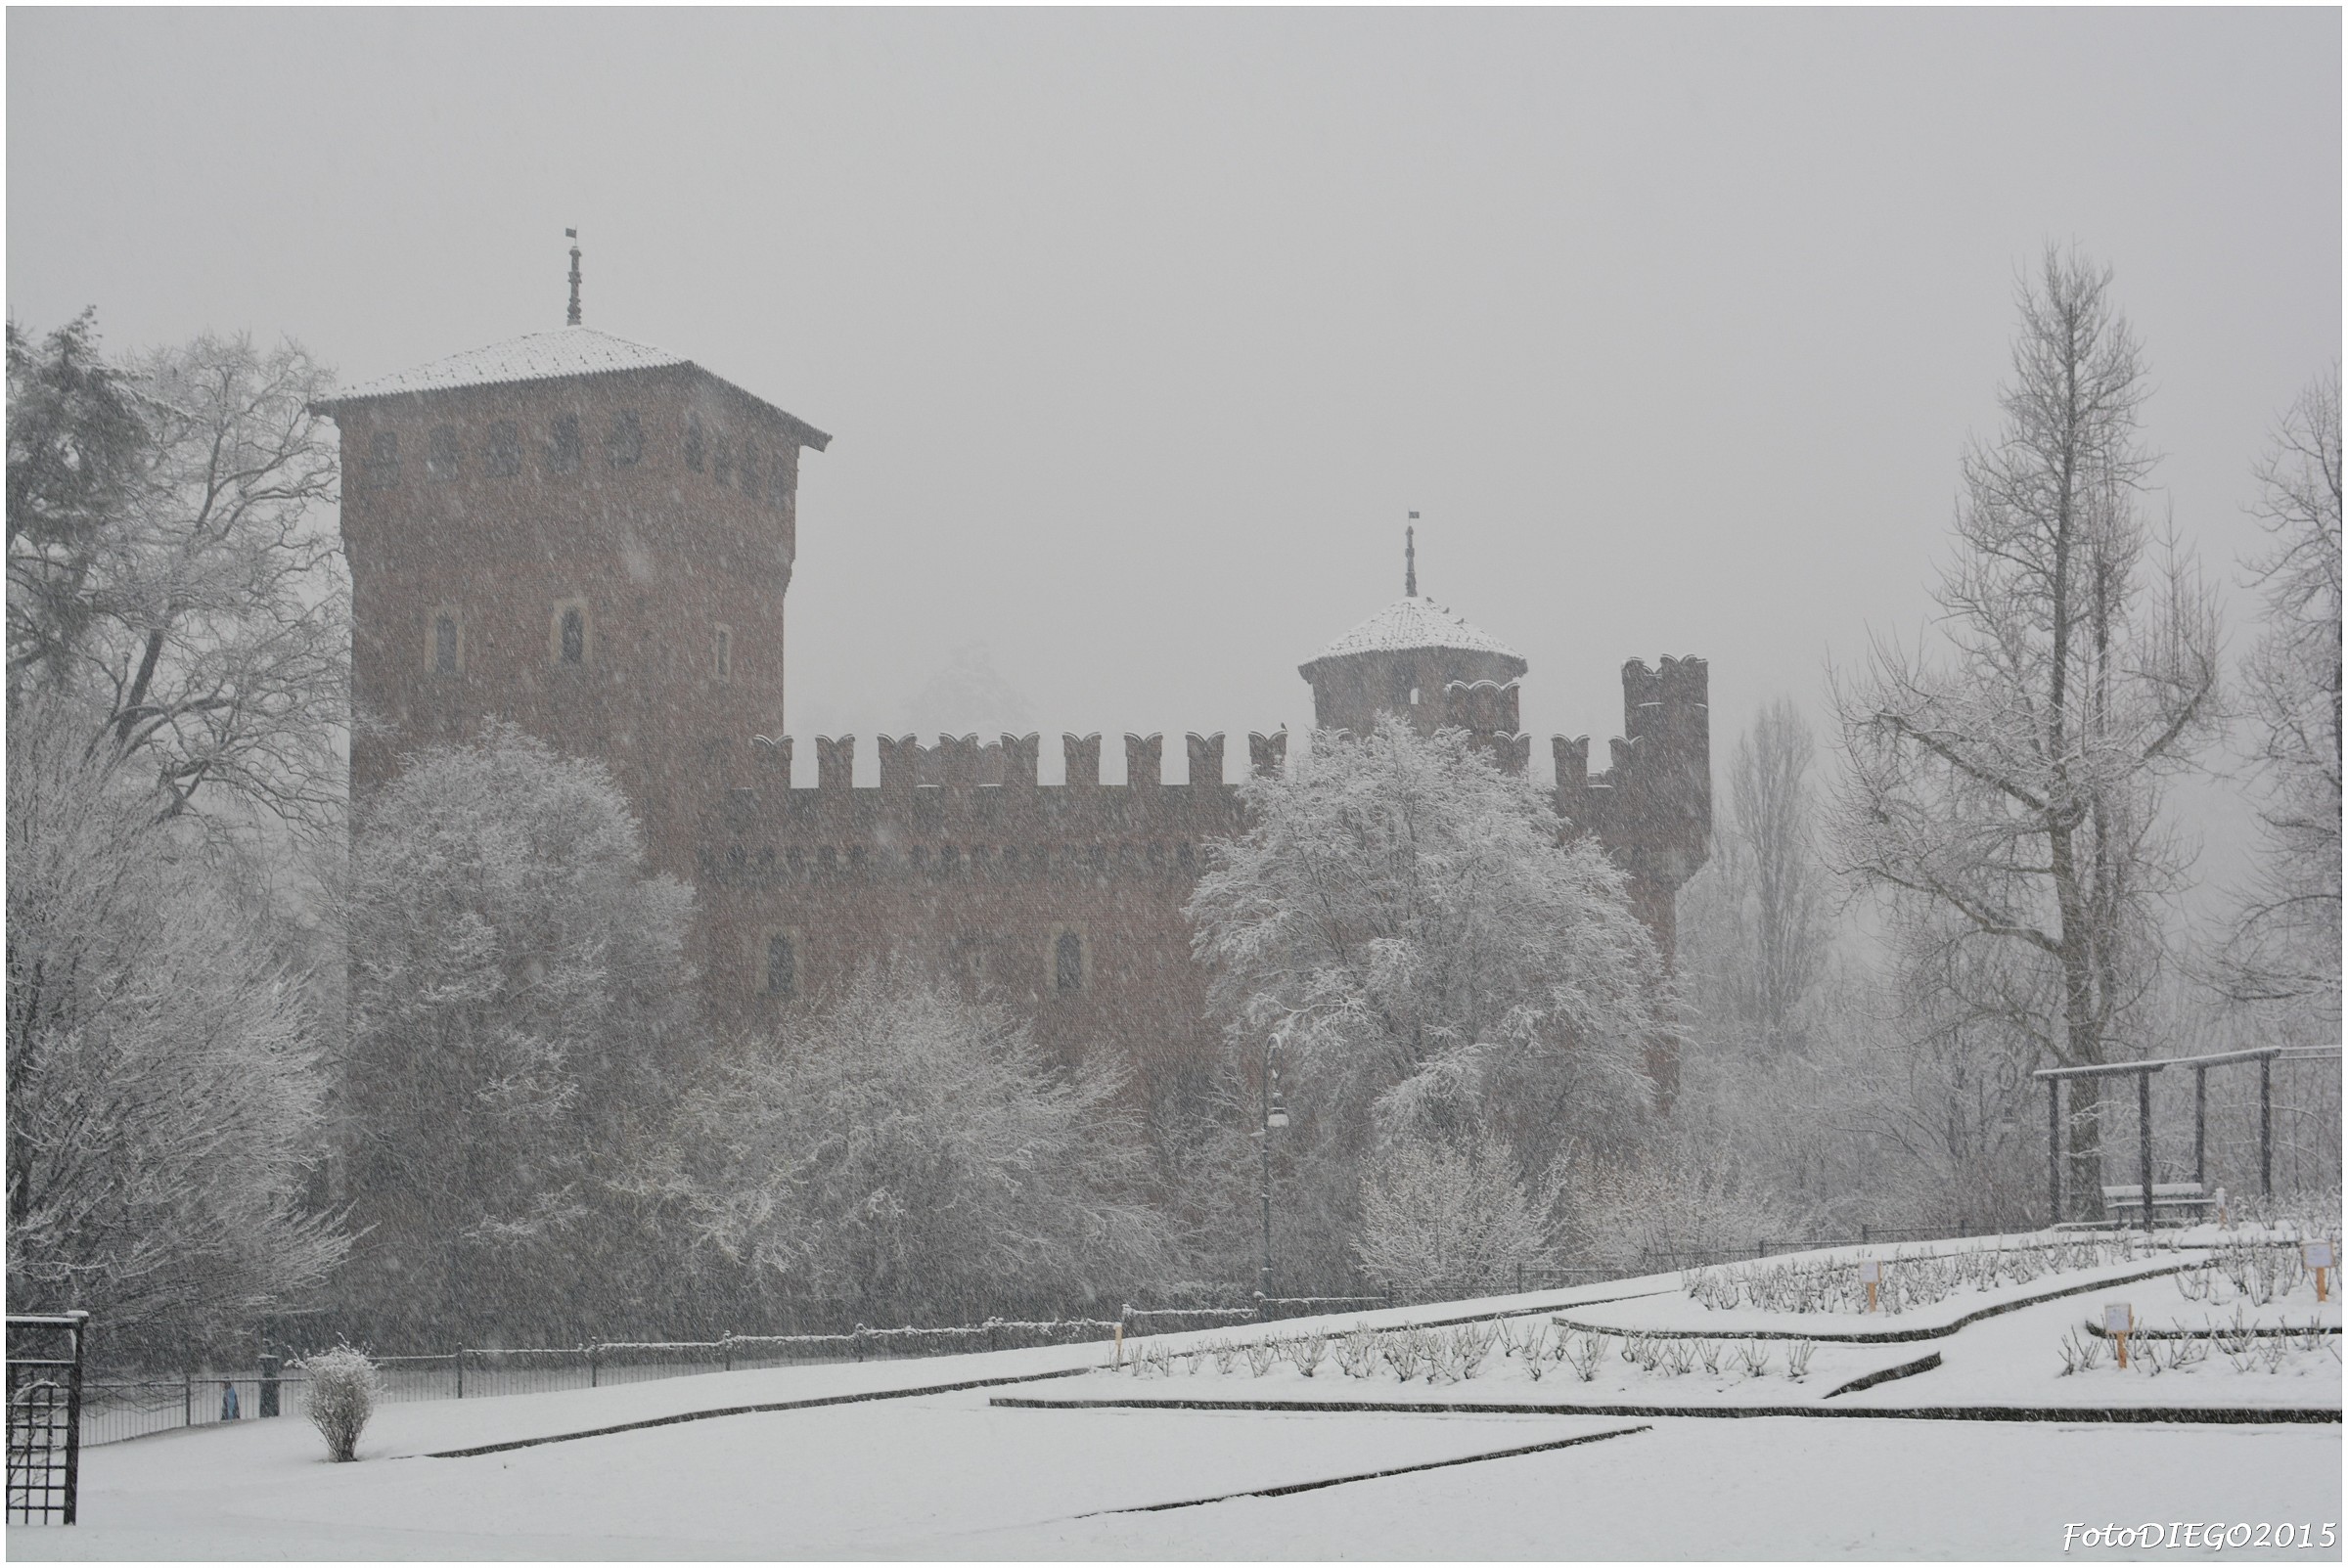 The fortress snowy...